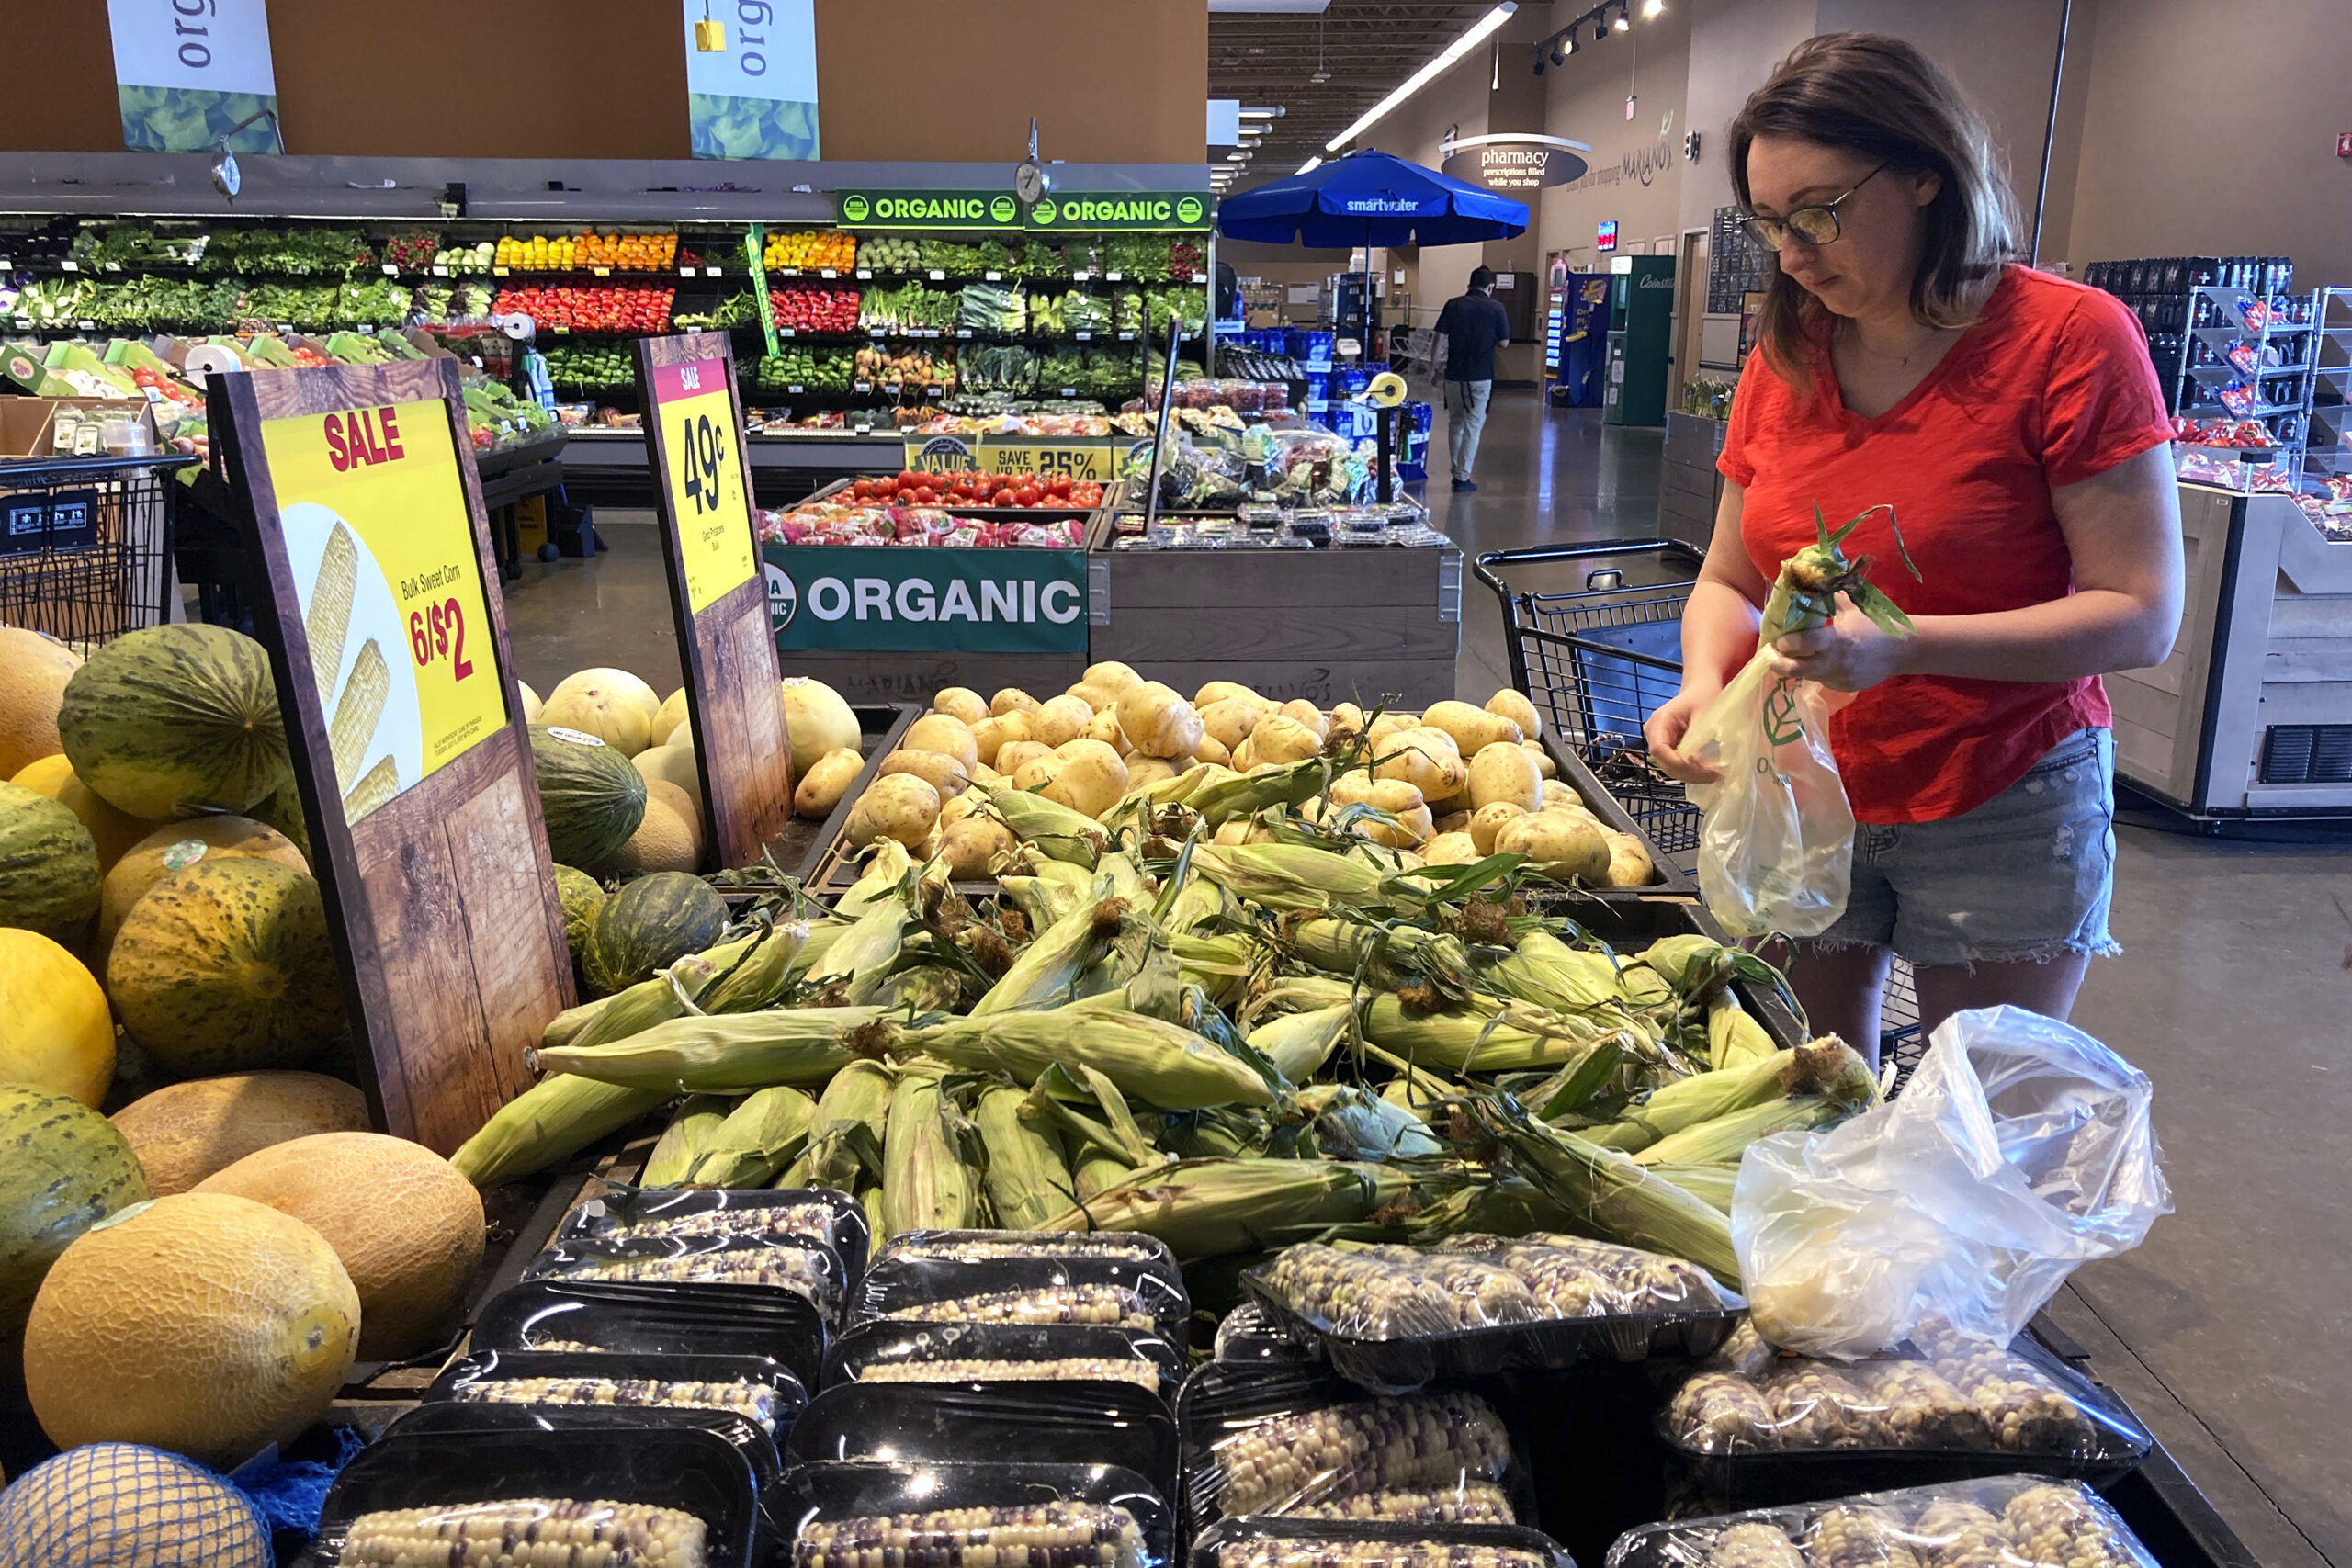 A person shops at a grocery store in Glenview, Ill.